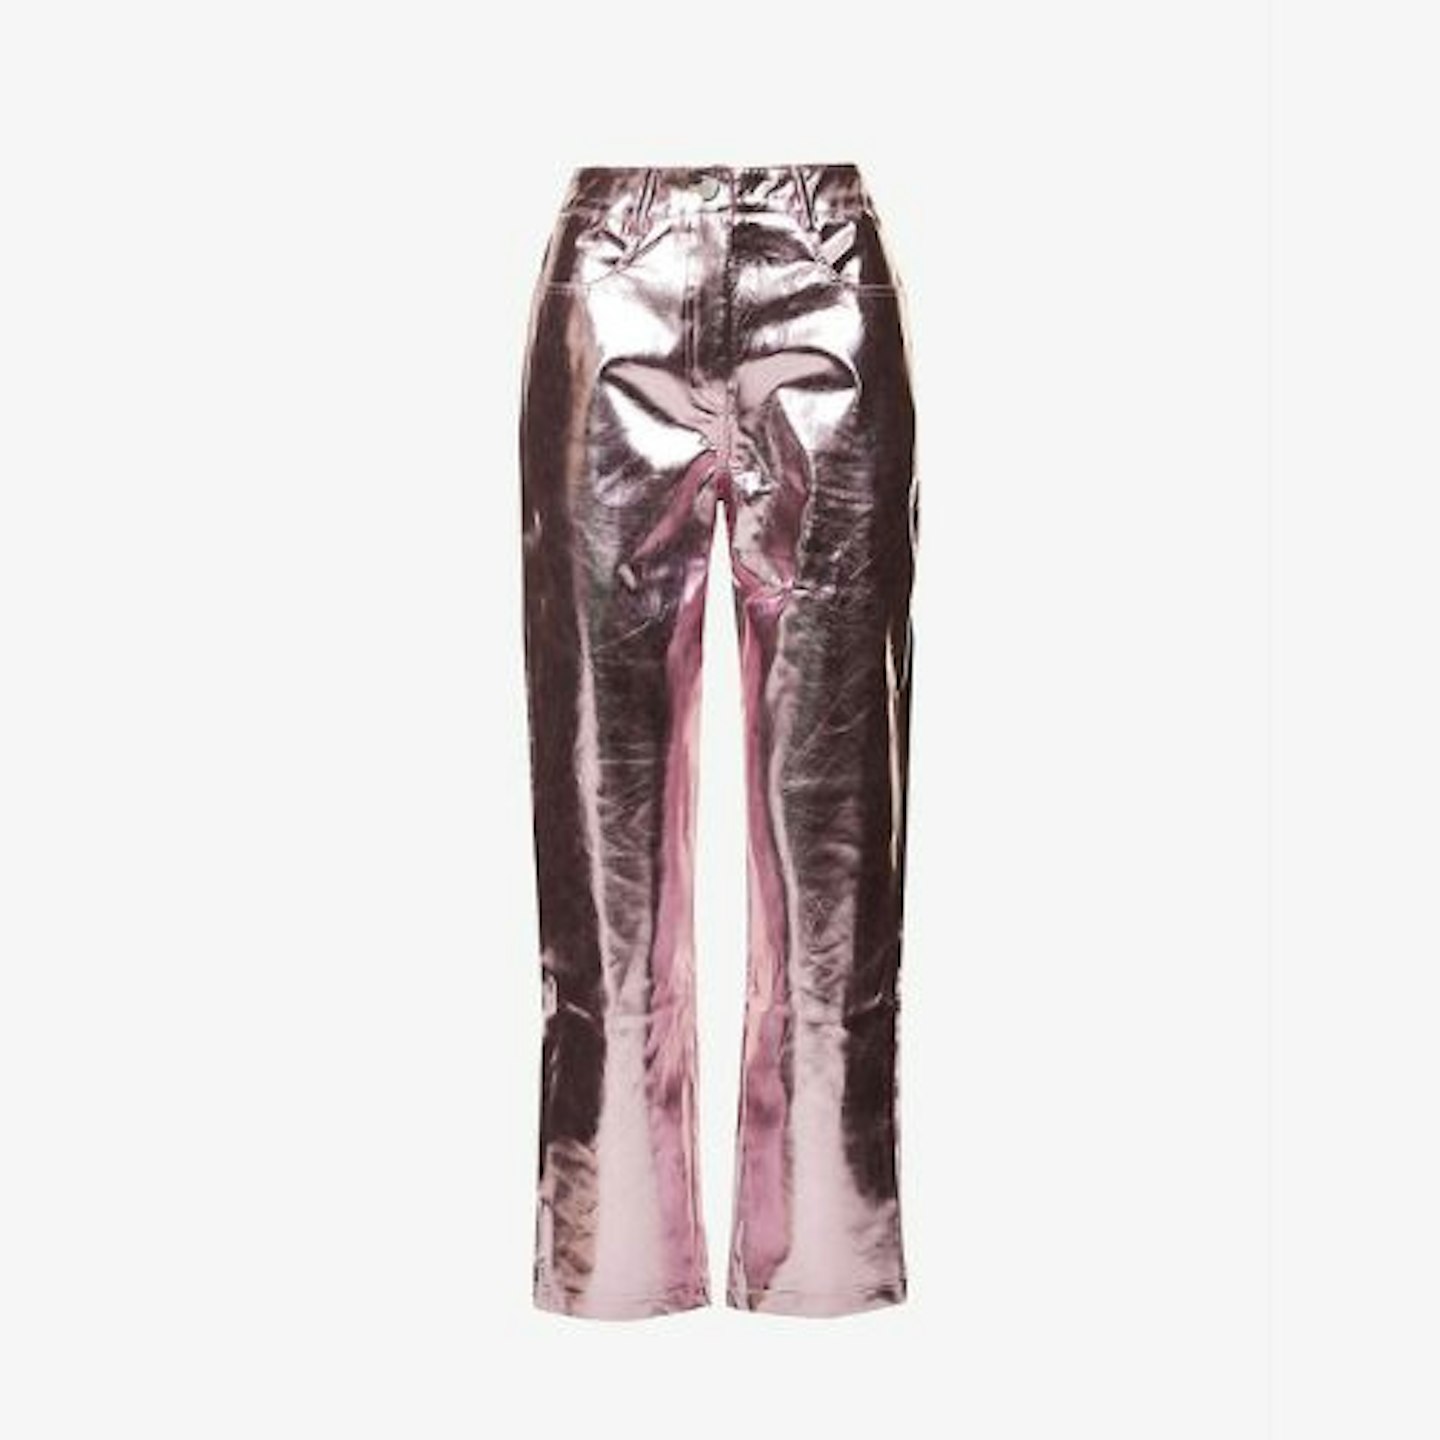 Amy Lynn Lupe Trousers in Metallic Light Pink